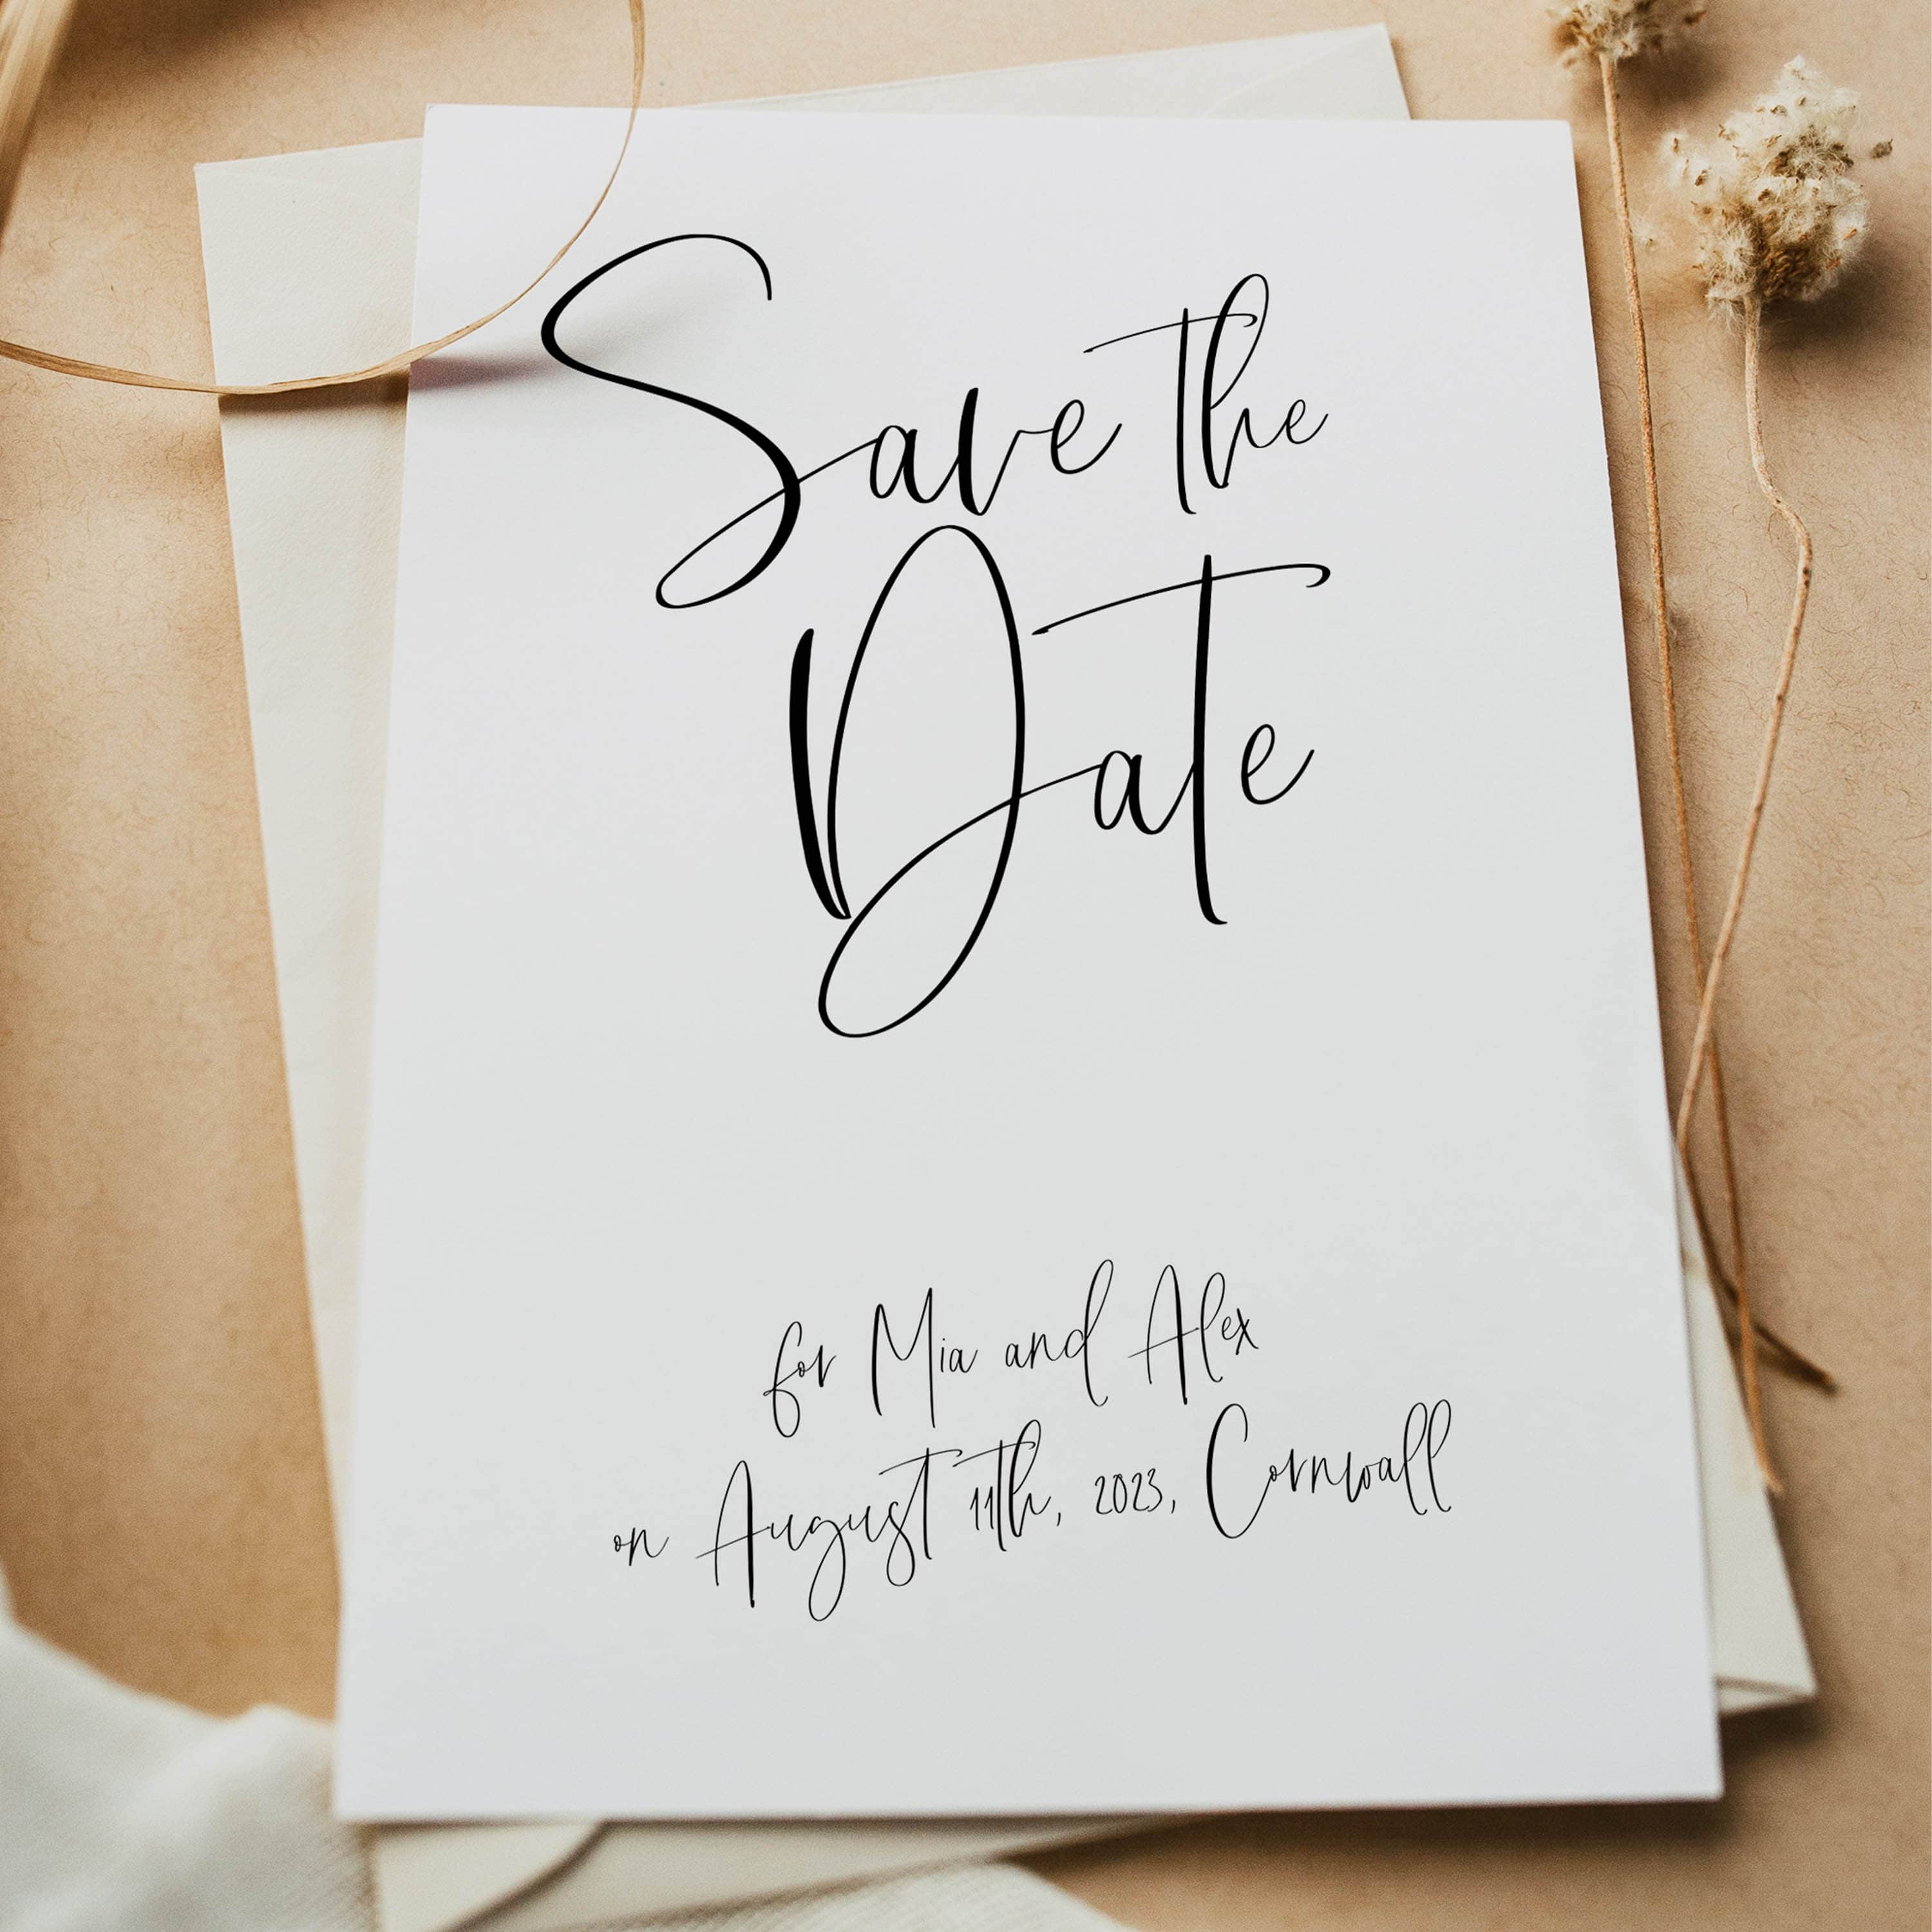 editable save the date cards, printable save the date cards, CALLIGRAPHY editable wedding invitation suite, editable wedding stationery, printable wedding stationery, modern wedding items, wedding save the dates